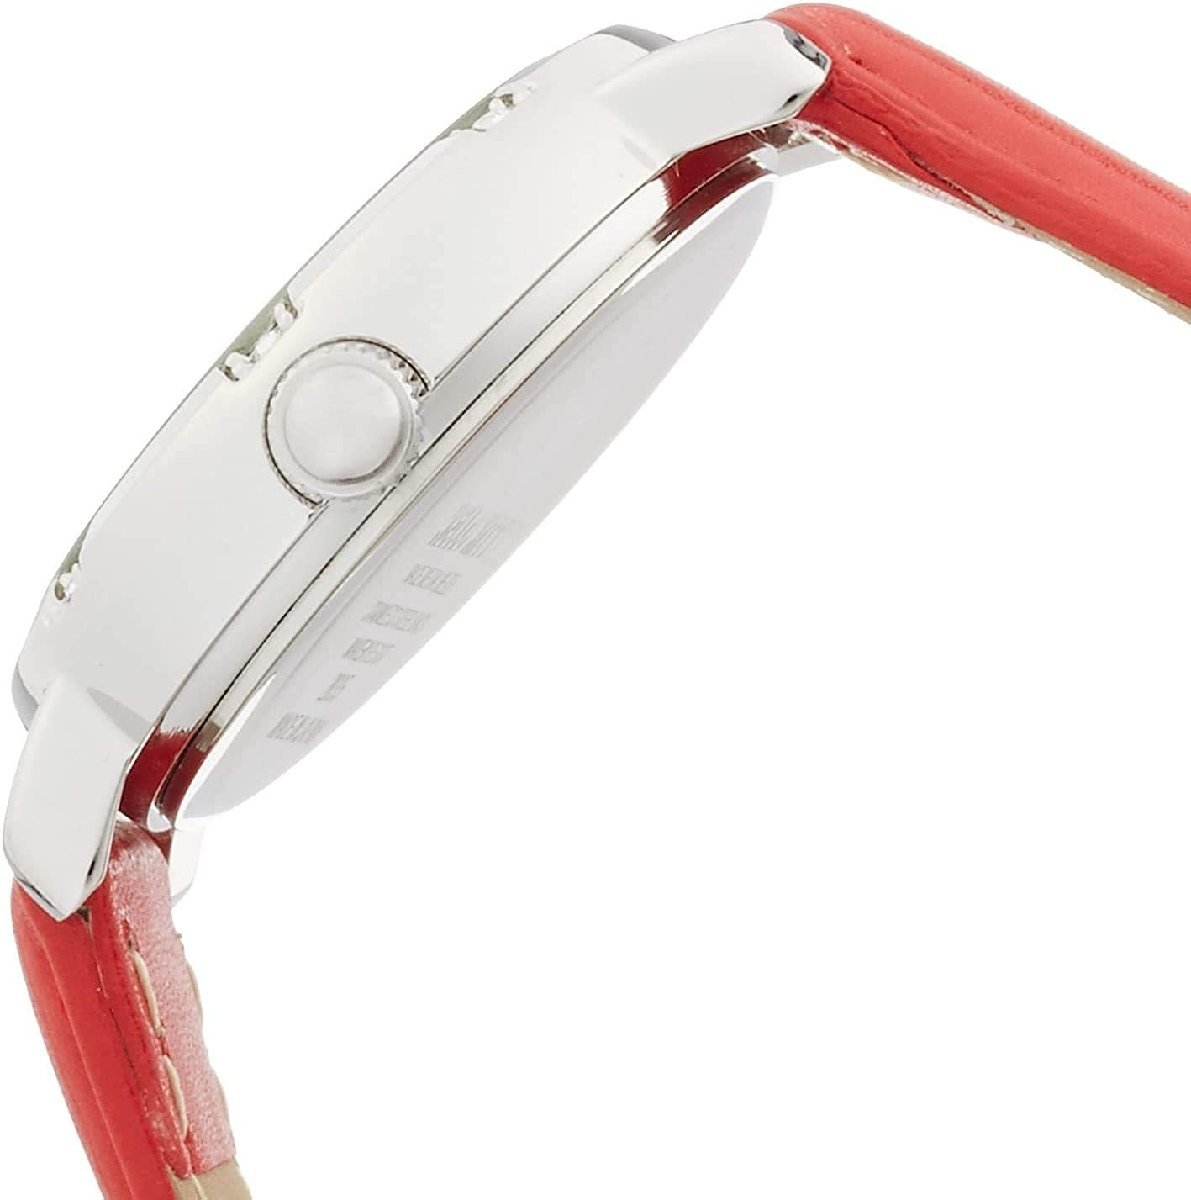  Citizen wristwatch Hello Kitty waterproof leather belt made in Japan 0003N003 silver / red 4966006058192/ free shipping 